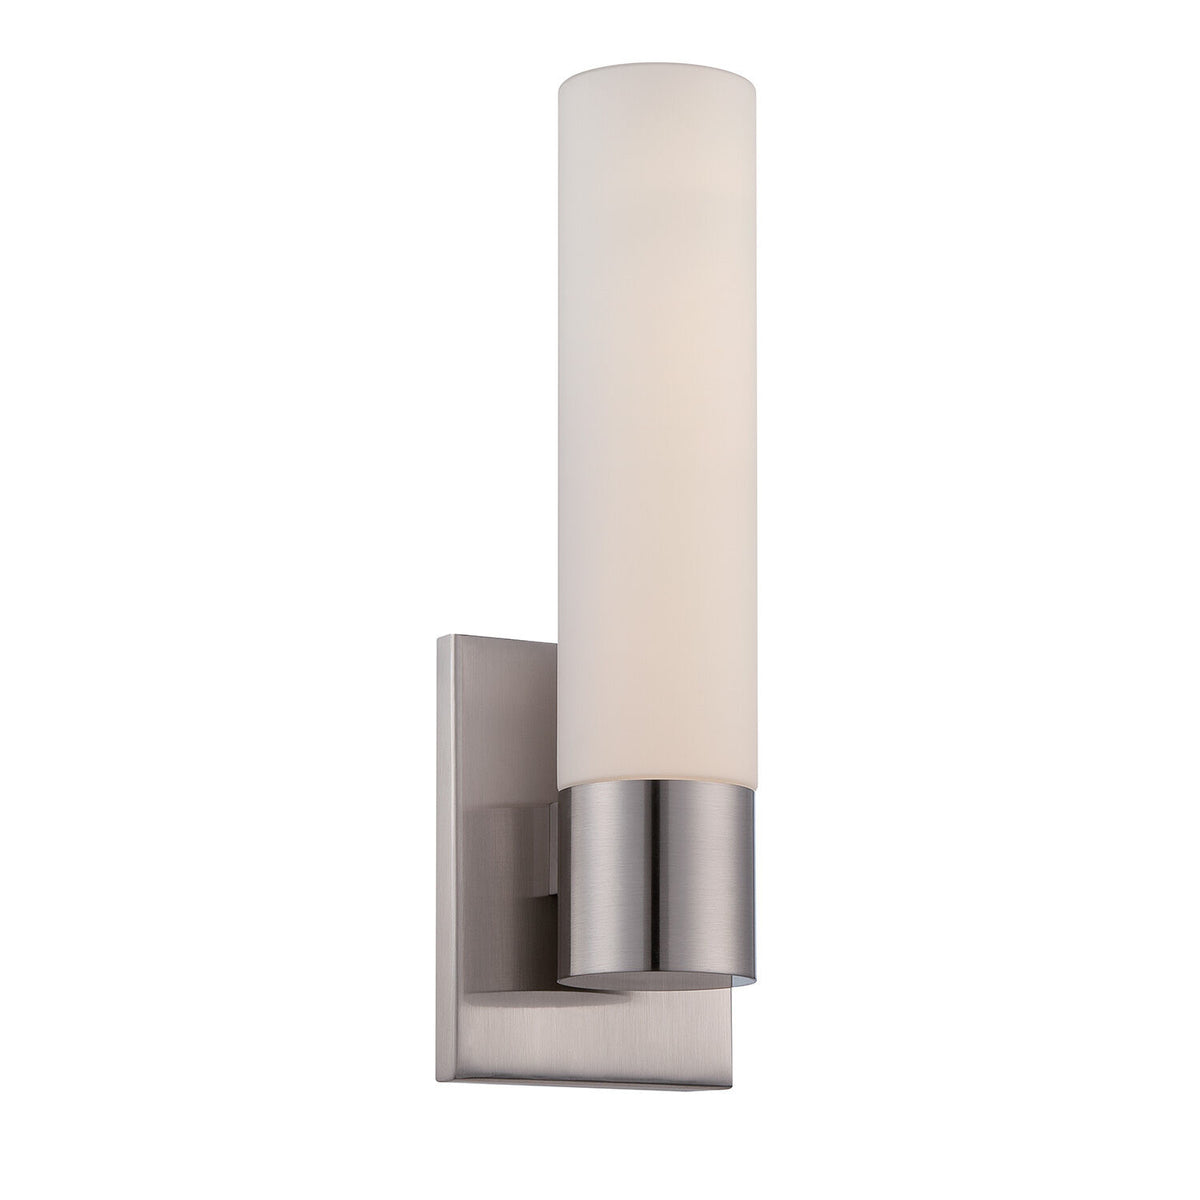 ELEMENTUM 13-INCH 2700K LED WALL SCONCE